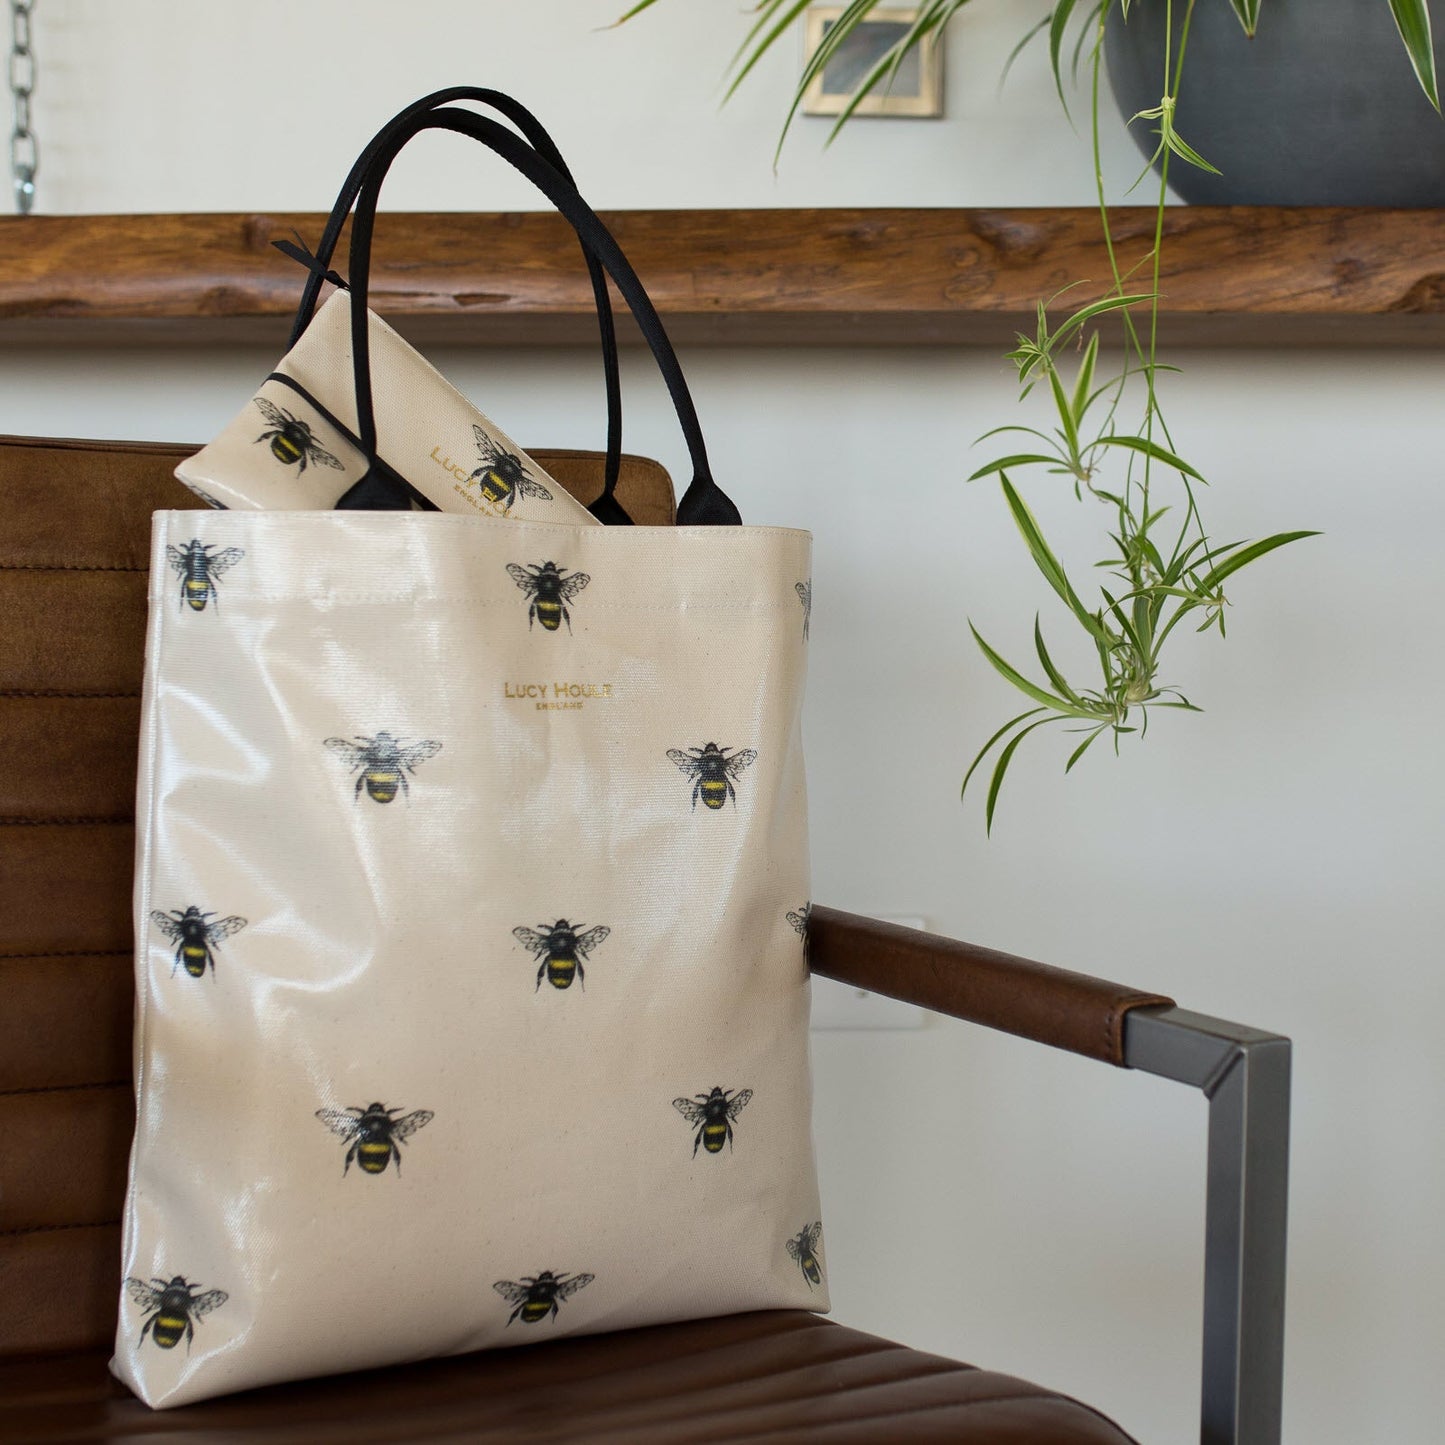 Vintage Bee 'Limited Edition' Shopper with Black Handles